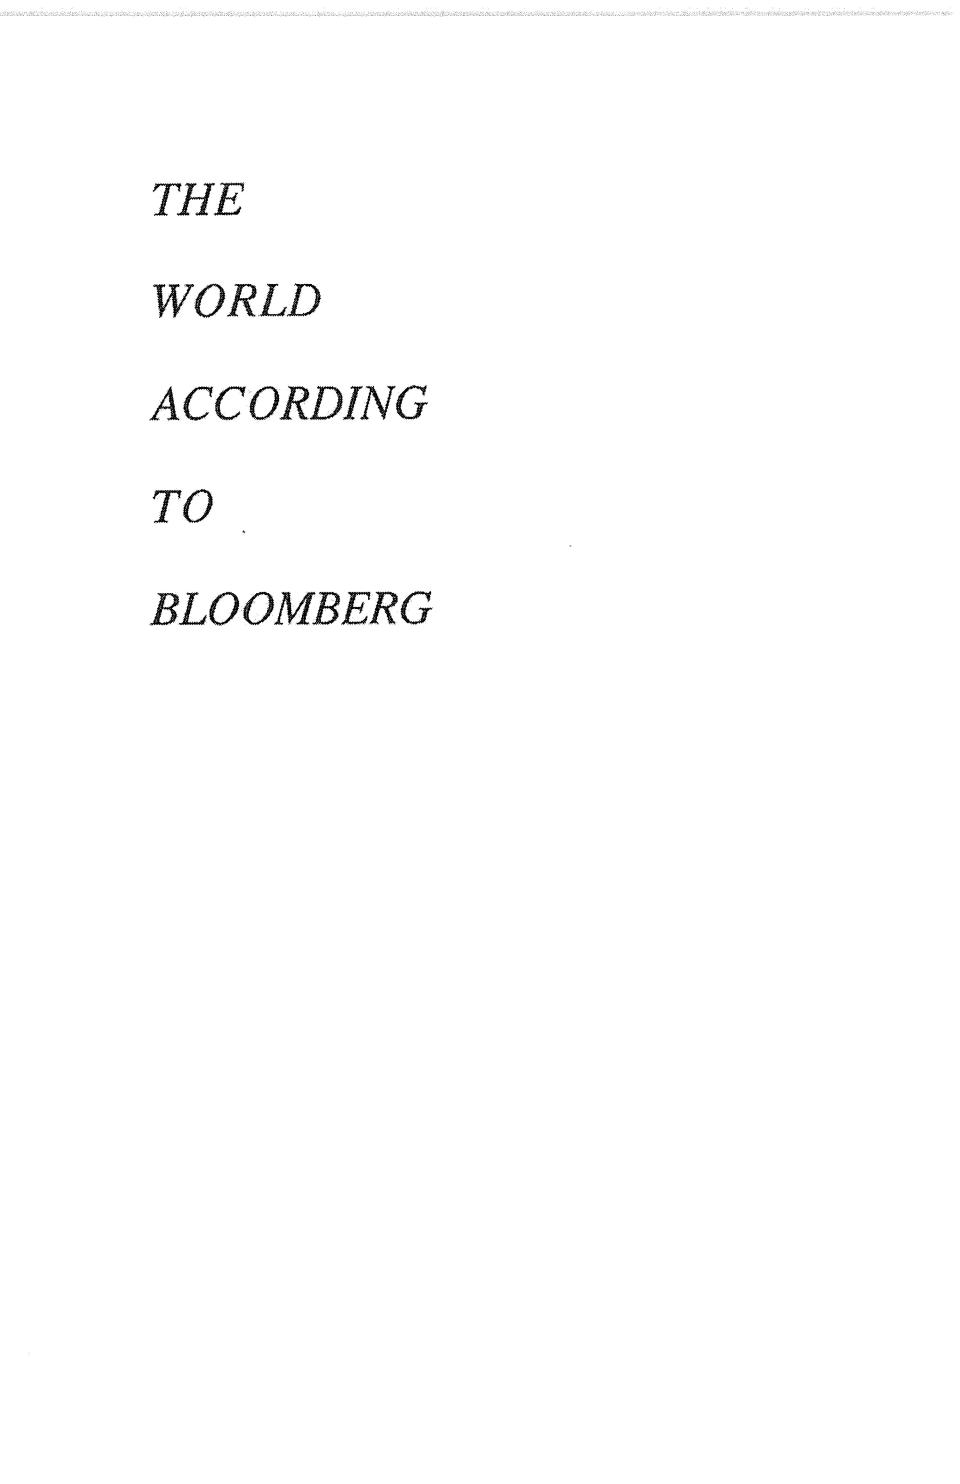 Page 25, The Portable Bloomberg